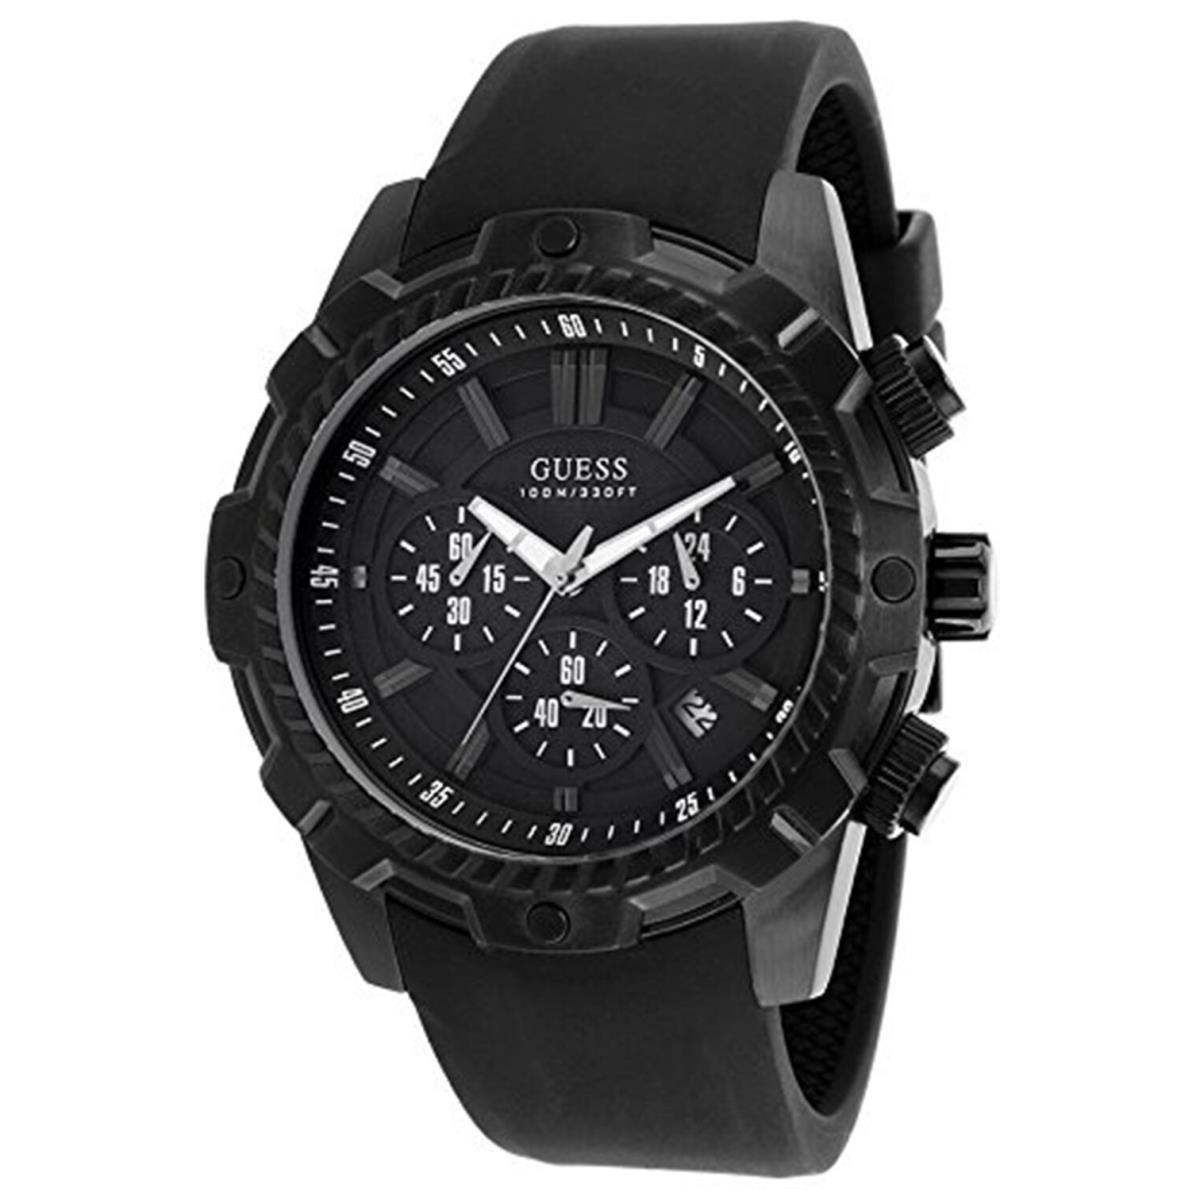 Chronograph Watches | Shop best selling Chronograph Watches | Fash 